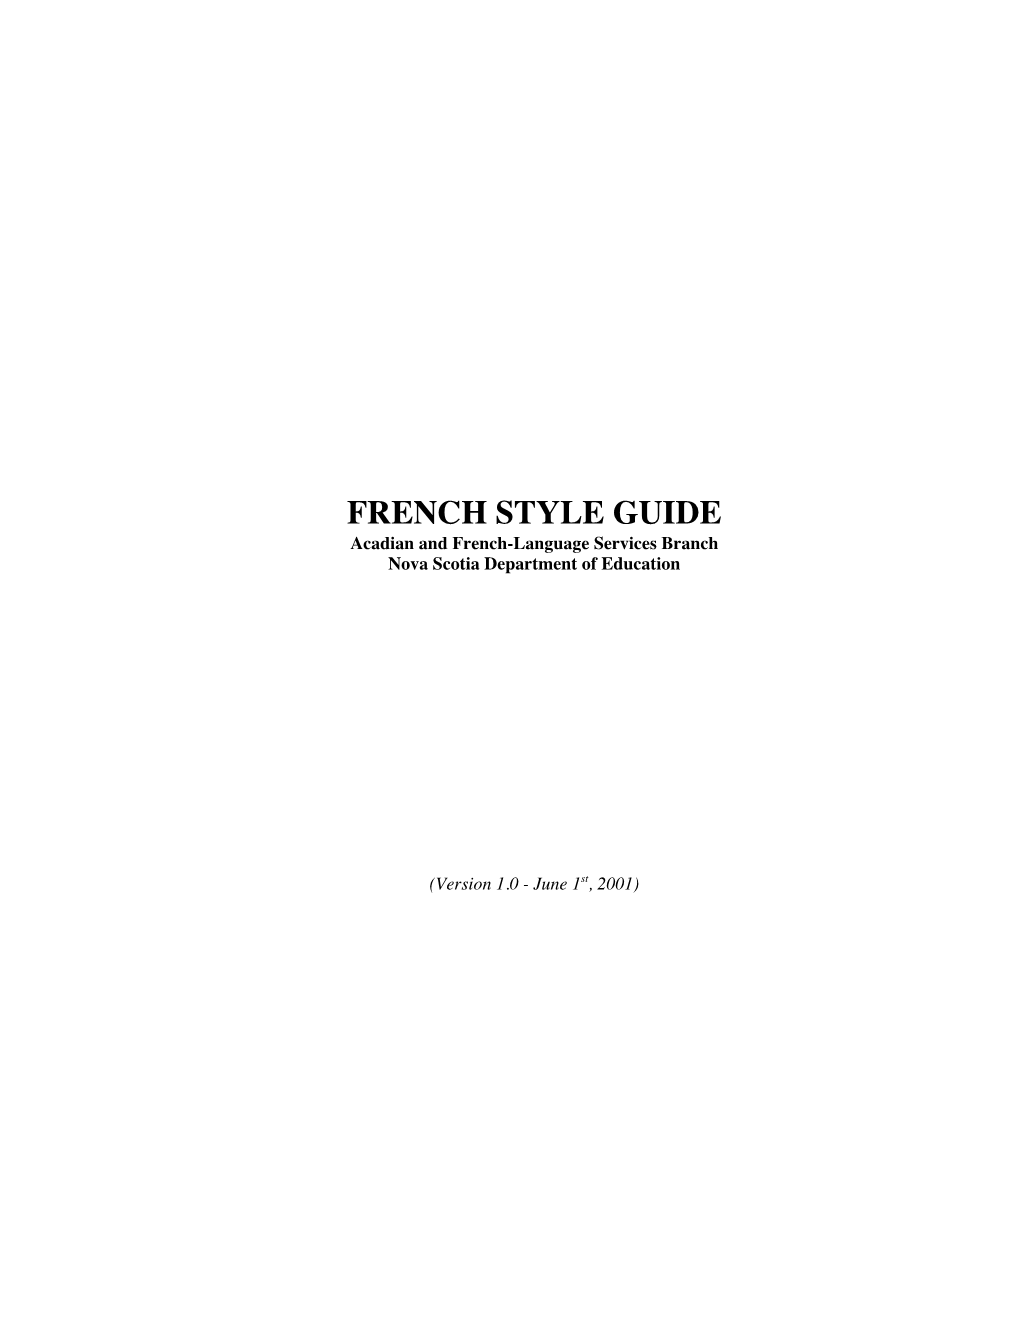 FRENCH STYLE GUIDE Acadian and French-Language Services Branch Nova Scotia Department of Education